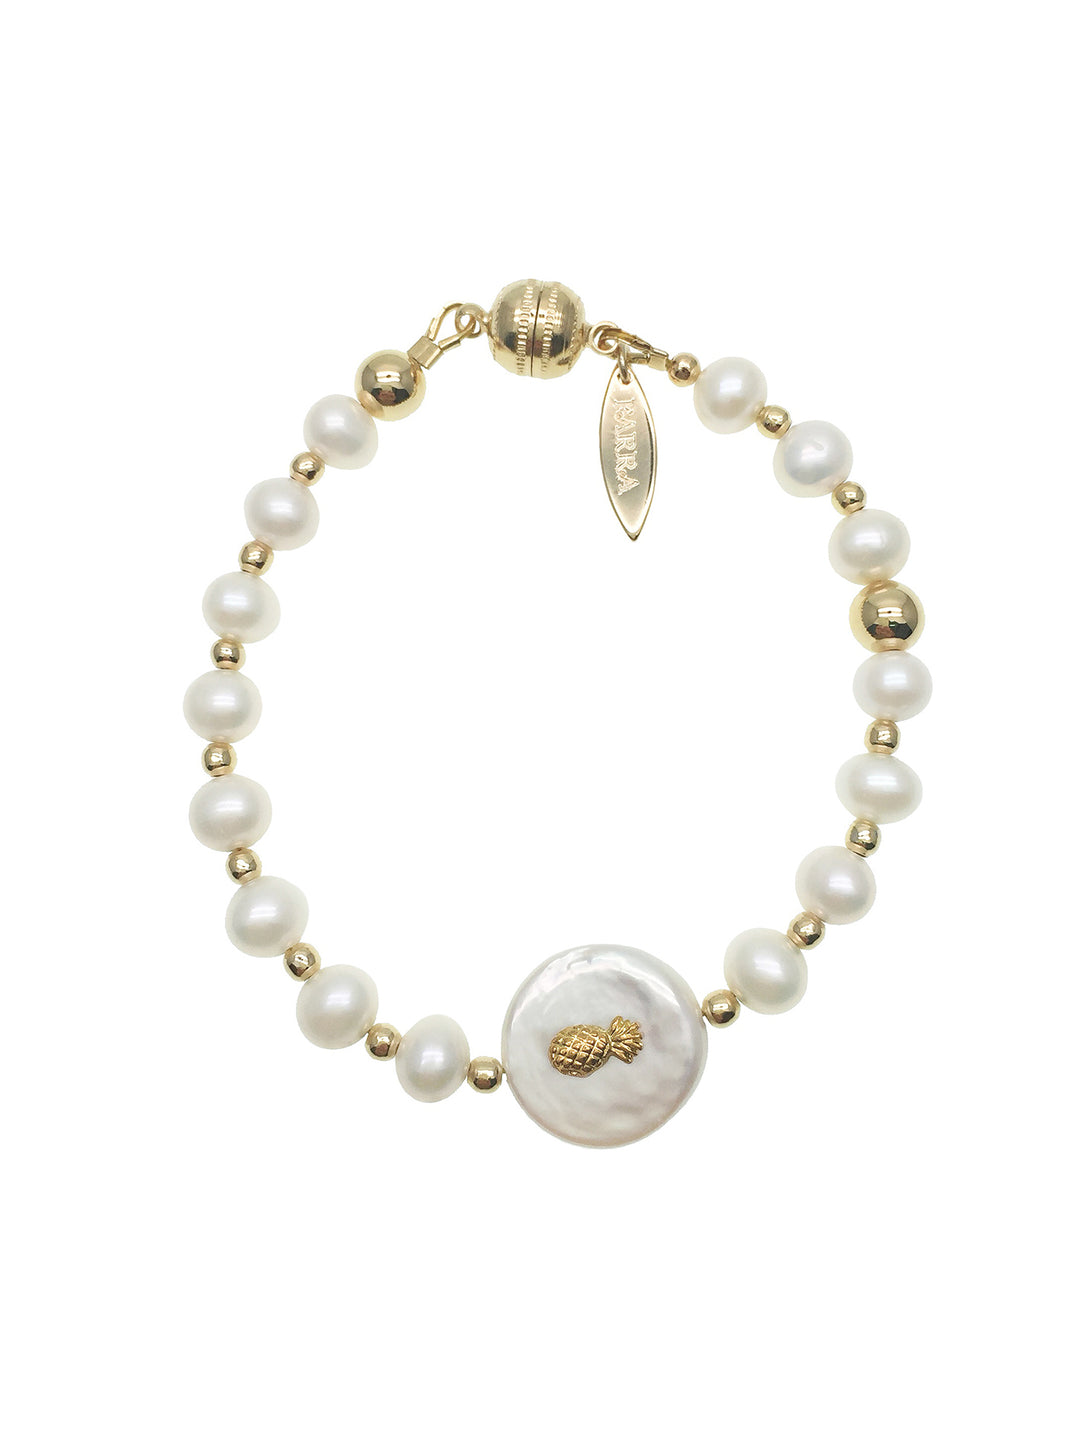 Freshwater Pearls With Pineapple Charm Bracelet MB120 - FARRA